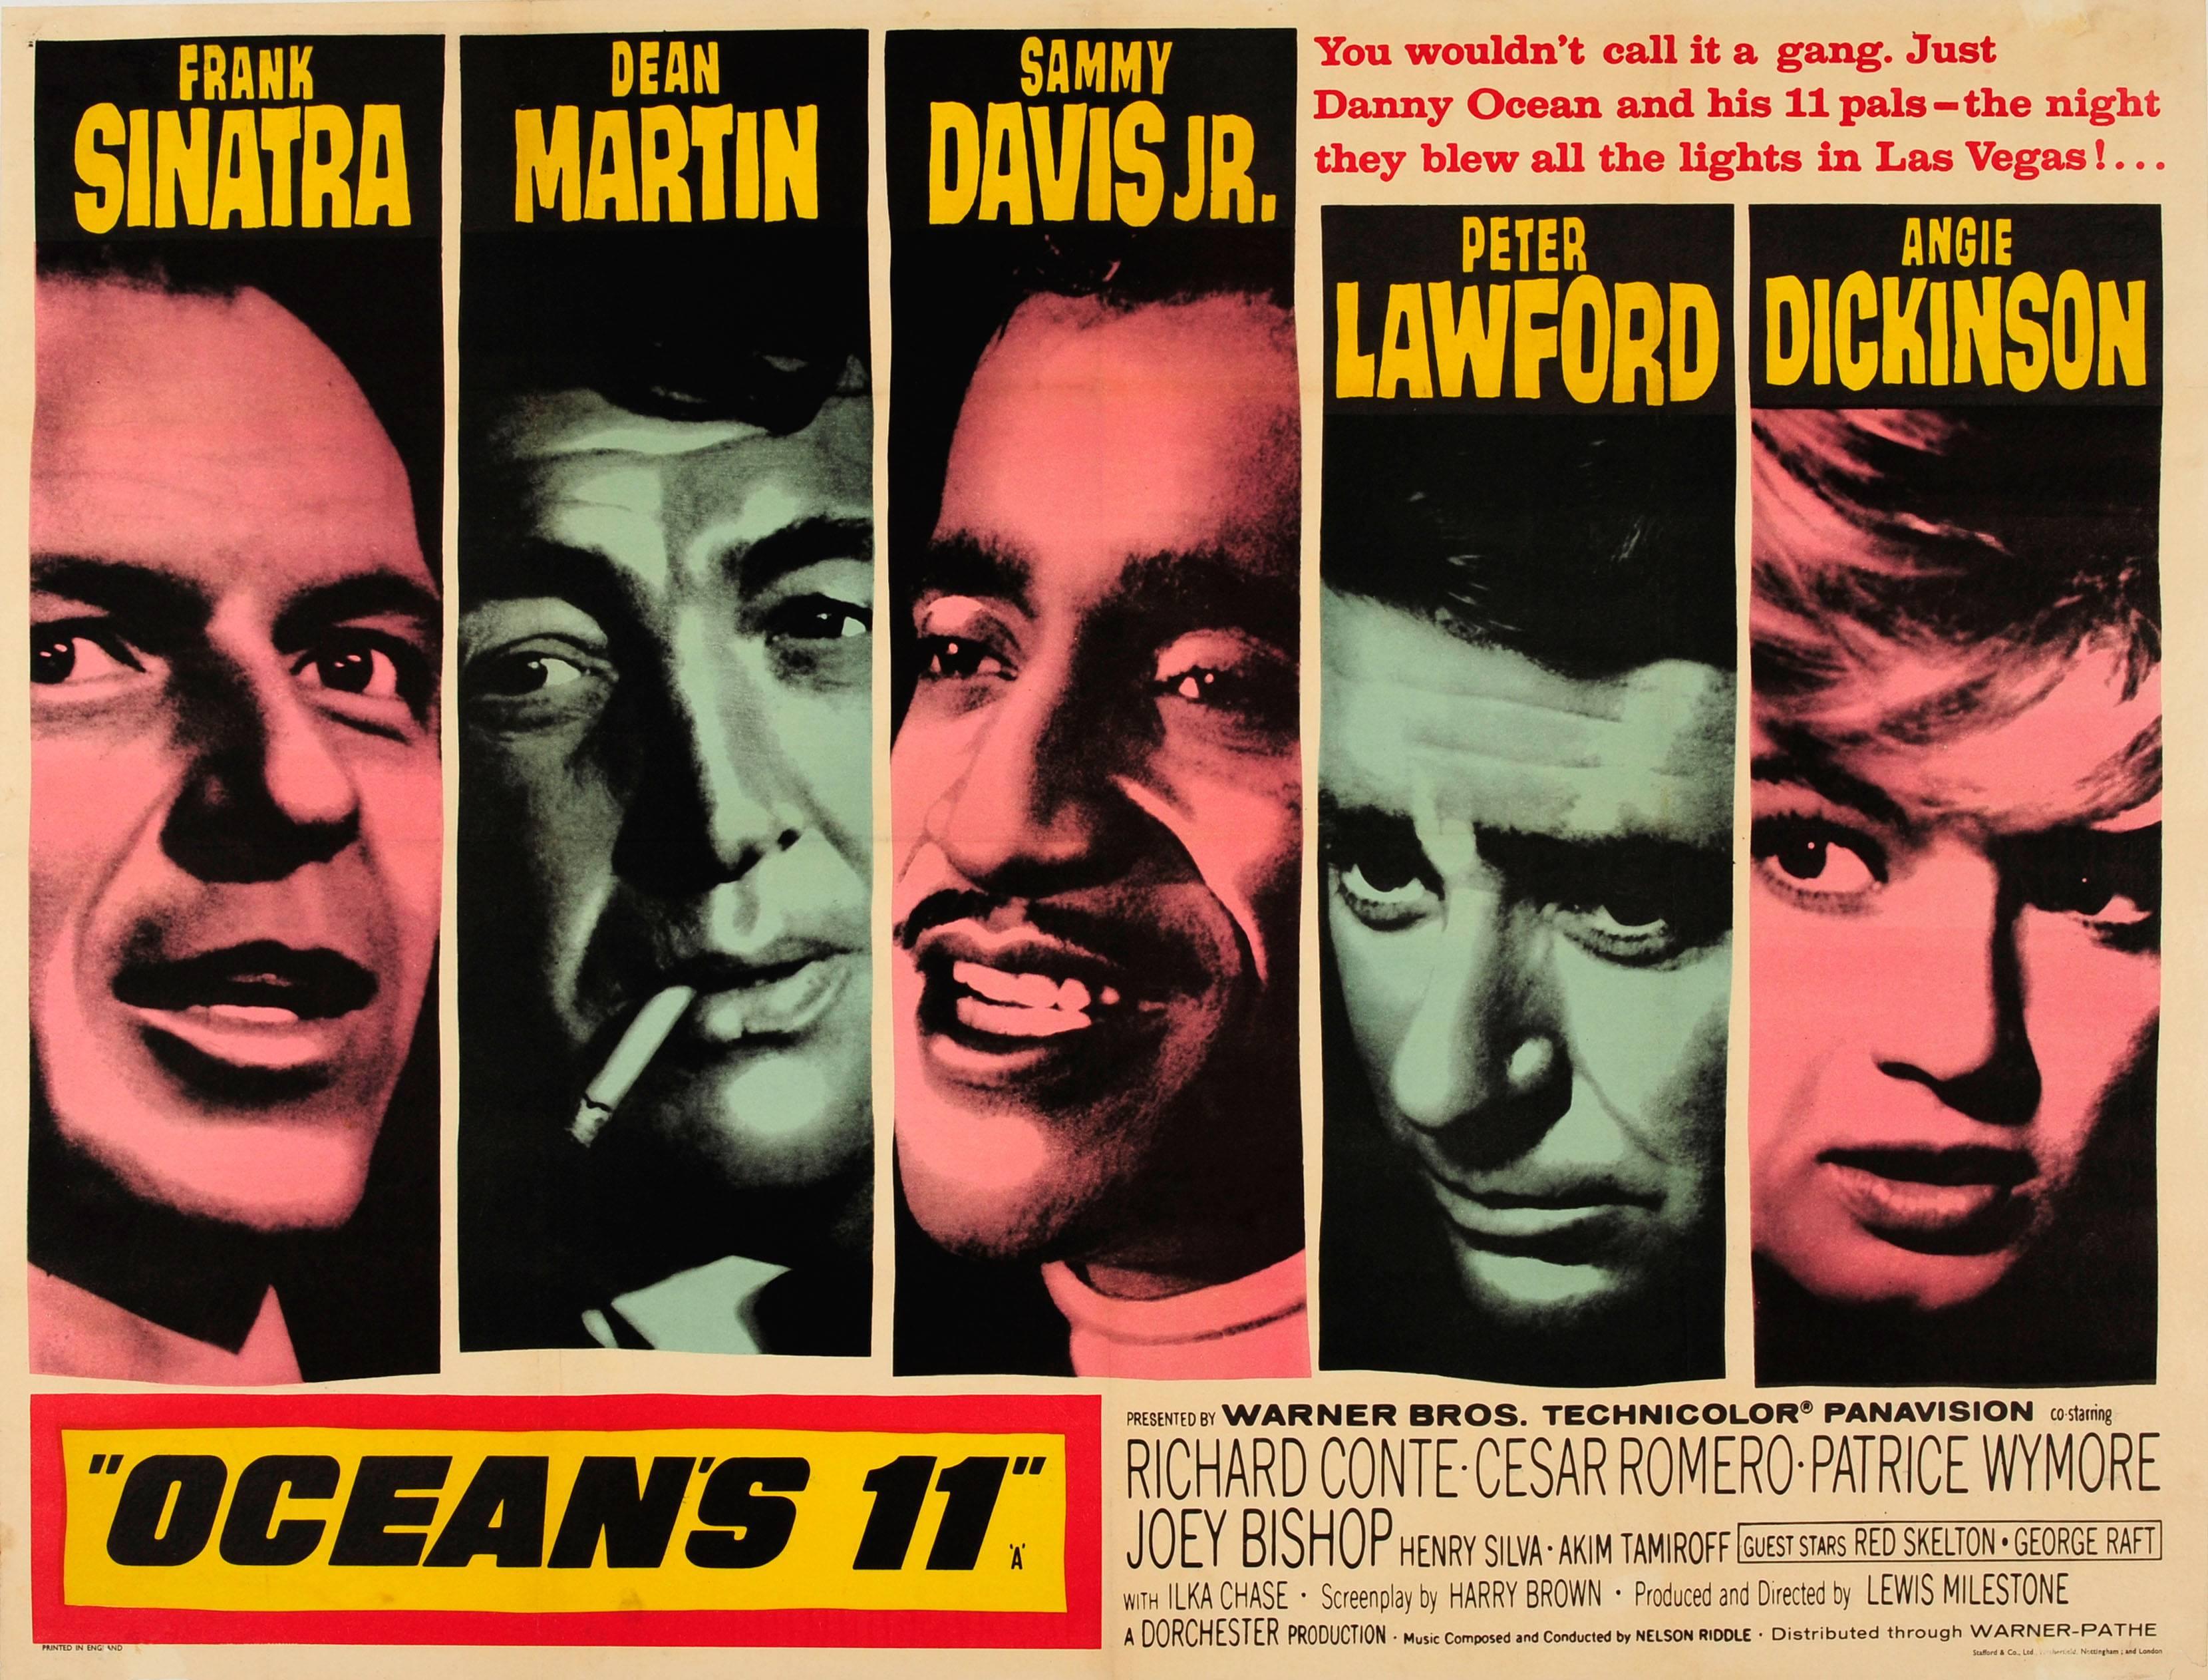 Unknown Print - Original Vintage Classic Movie Poster For Ocean's 11 - Sinatra And The Rat Pack